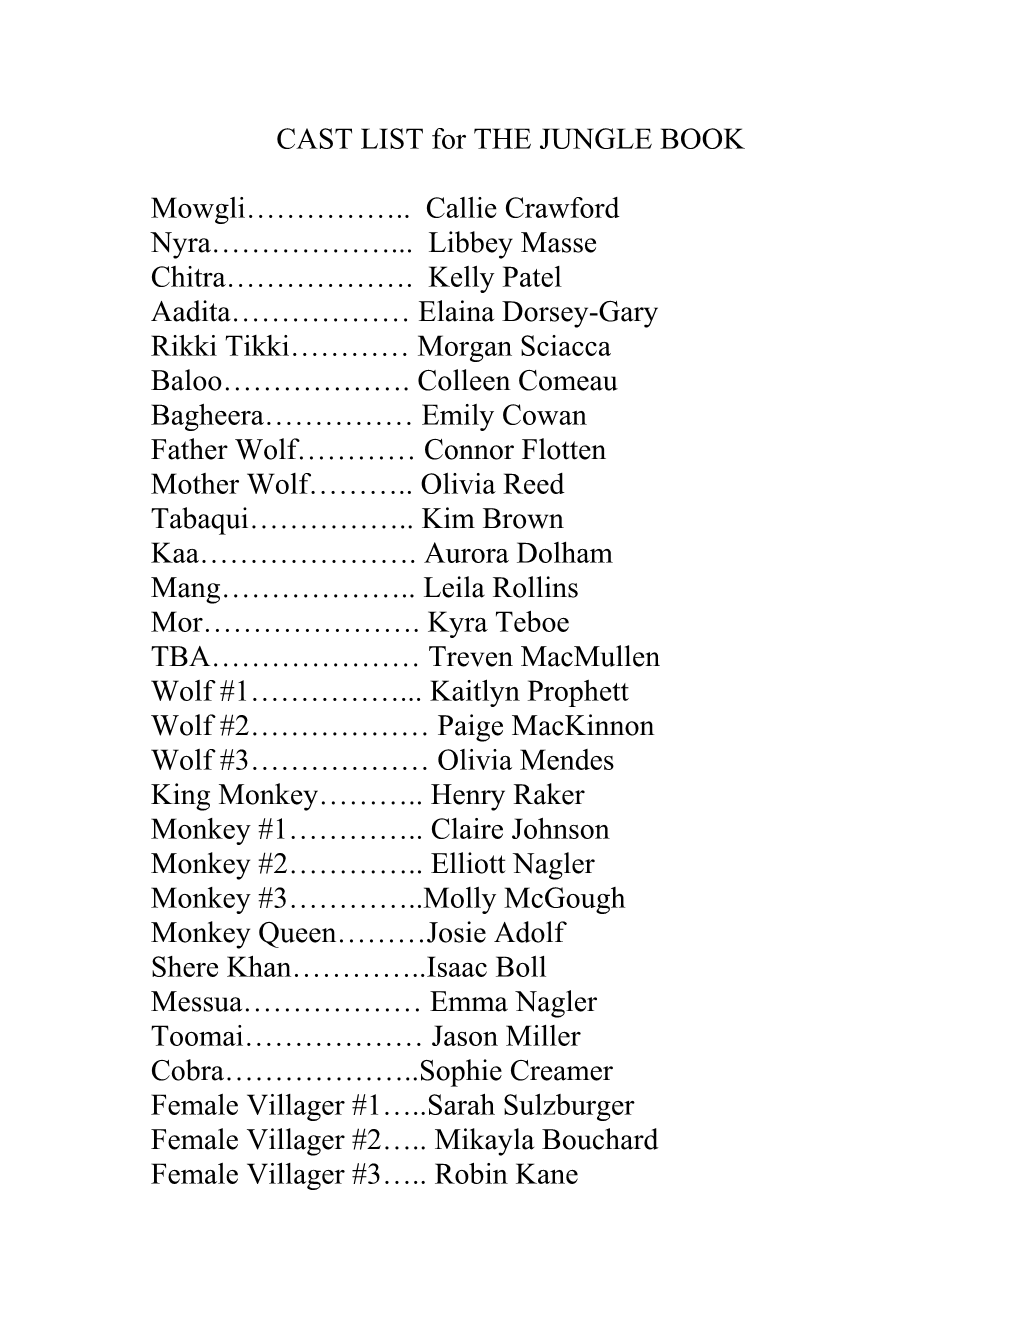 CAST LIST for the JUNGLE BOOK